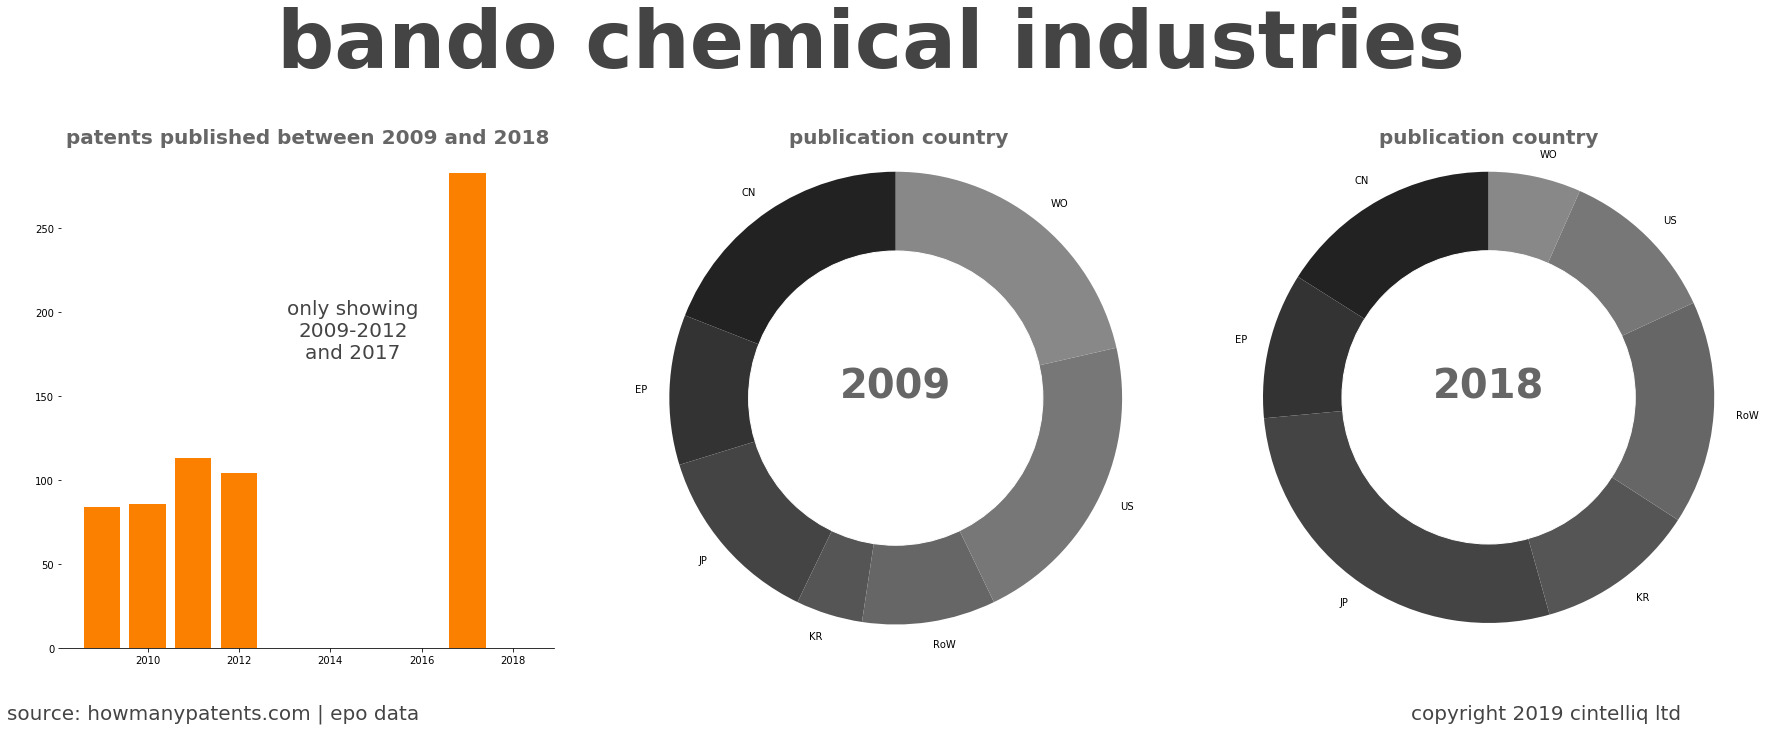 summary of patents for Bando Chemical Industries